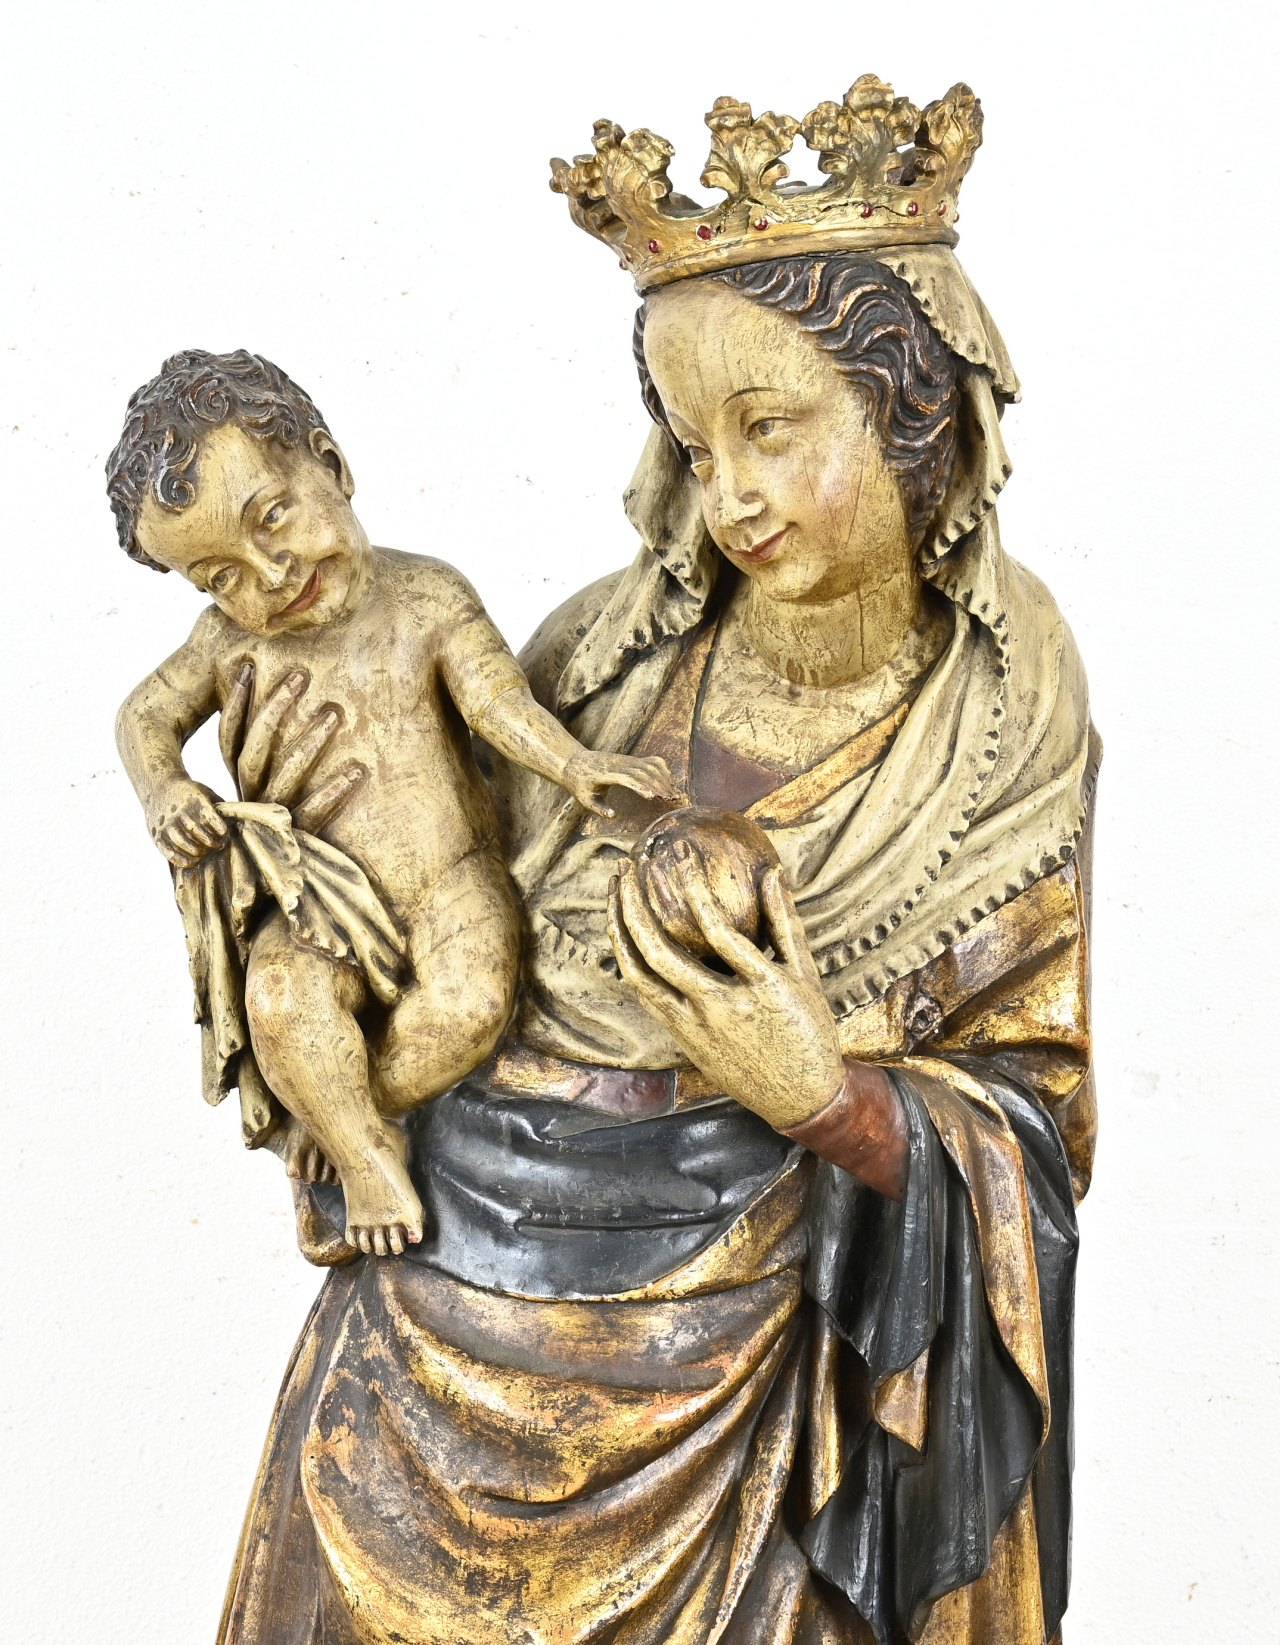 Mary with child statue, H 1.40 m. - Image 2 of 3